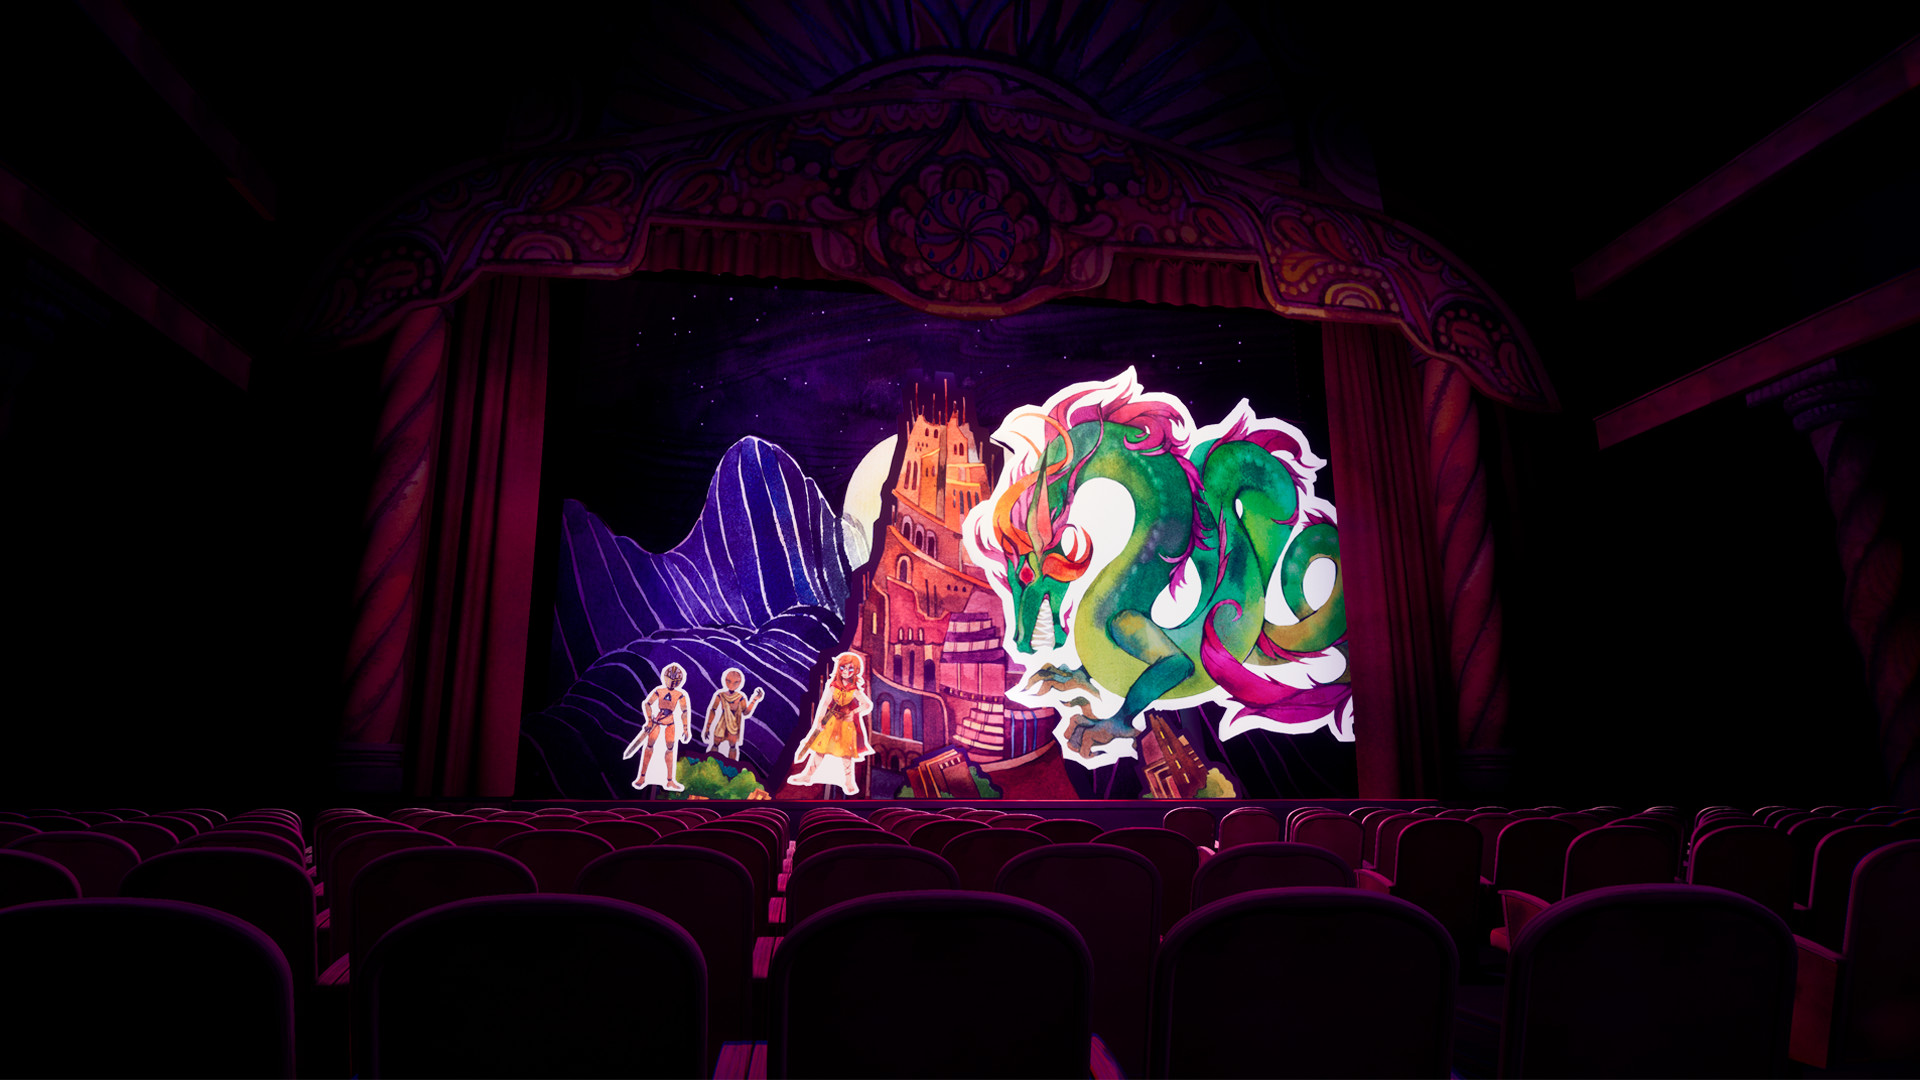 A screenshot from Flawless Abbey. In a theatre, on-stage, there are four paper puppets: one dragon, one orange-haired person with a sword, a masked person with a sword, and someone with no weapon.